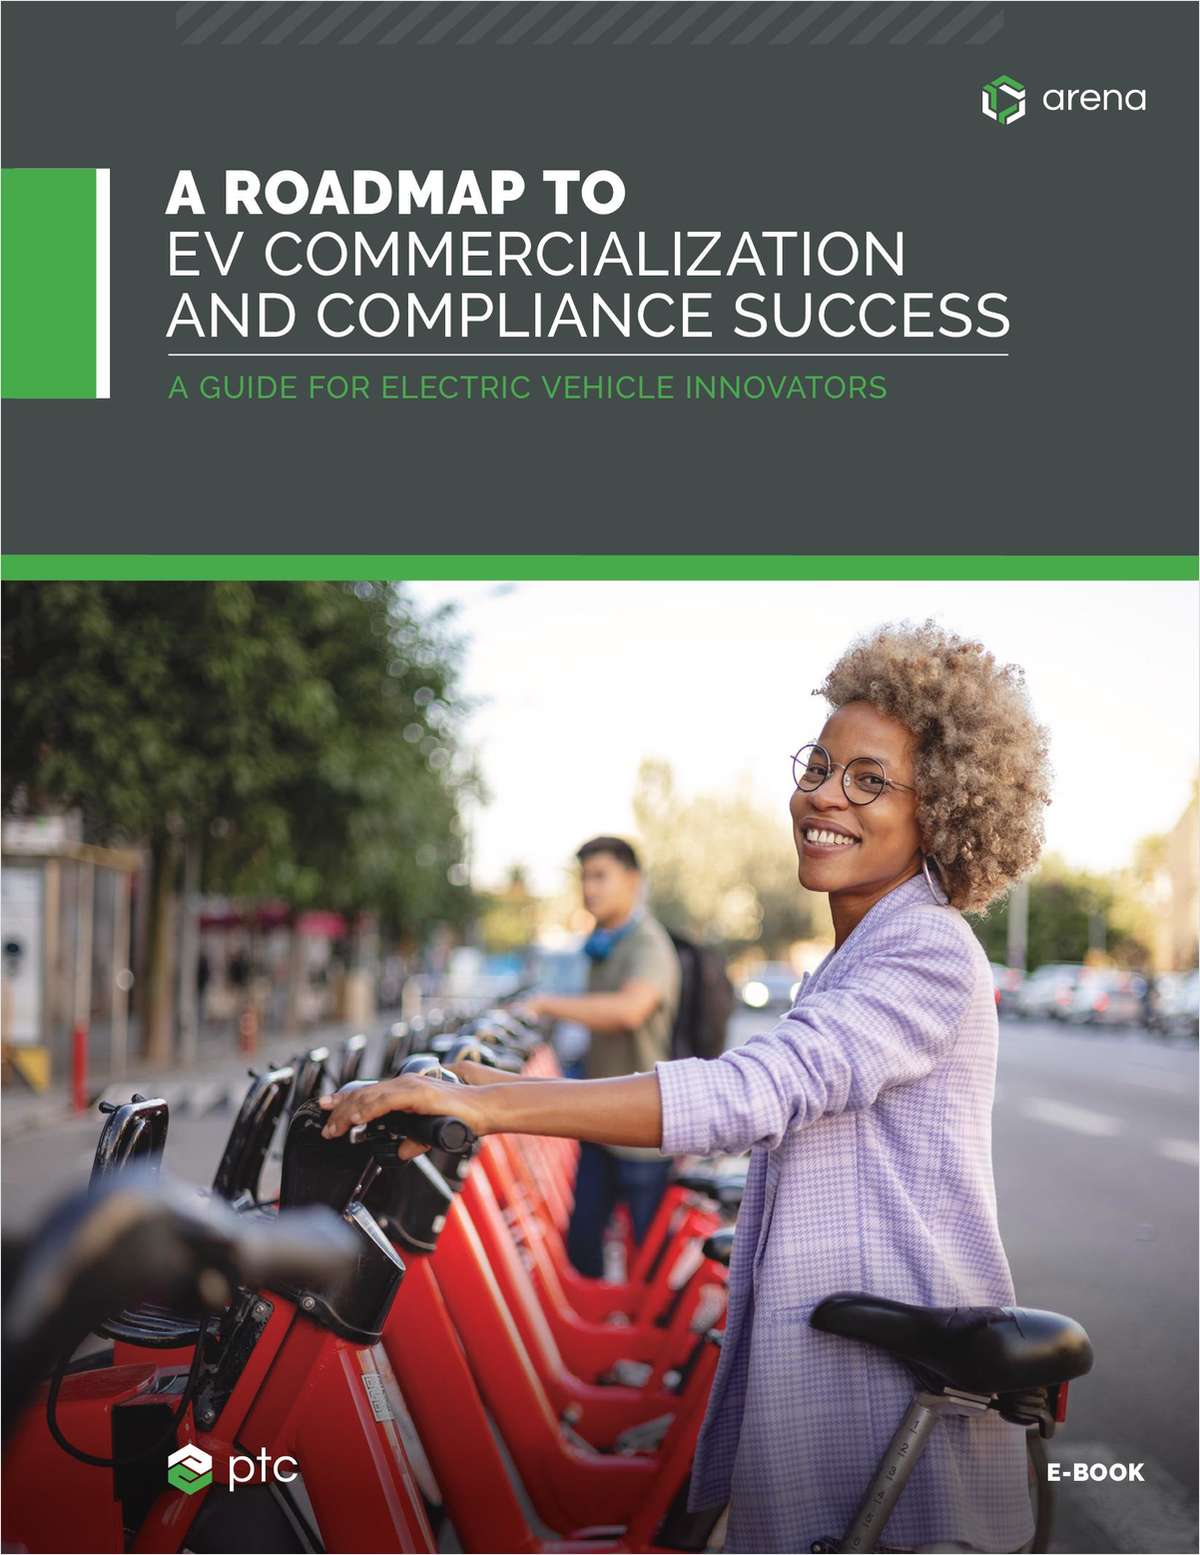 Roadmap to EV Commercialization and Compliance Success